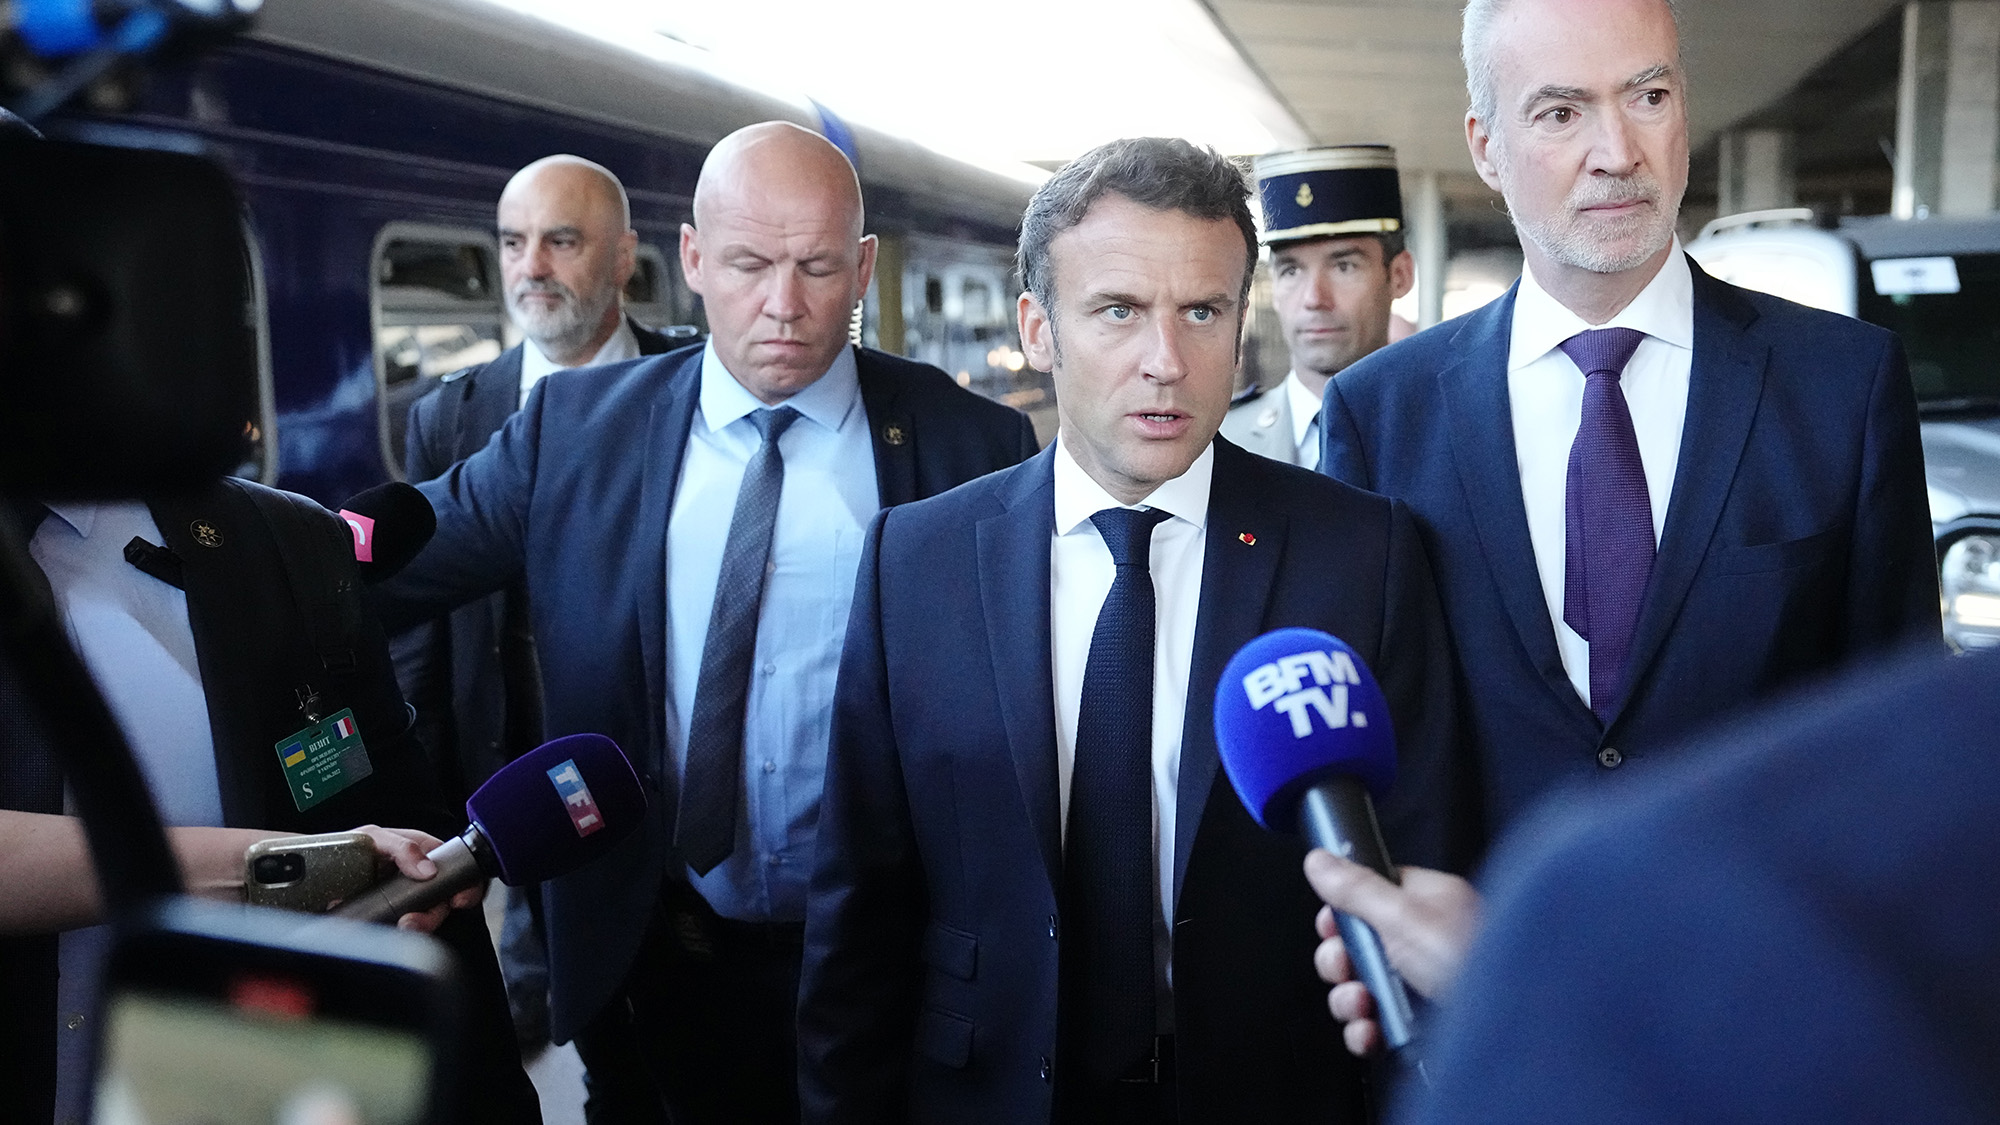 President of France Emmanuel Macron, center, speaks to the media upon arrival at the train station in Kyiv, Ukraine, on June 16.